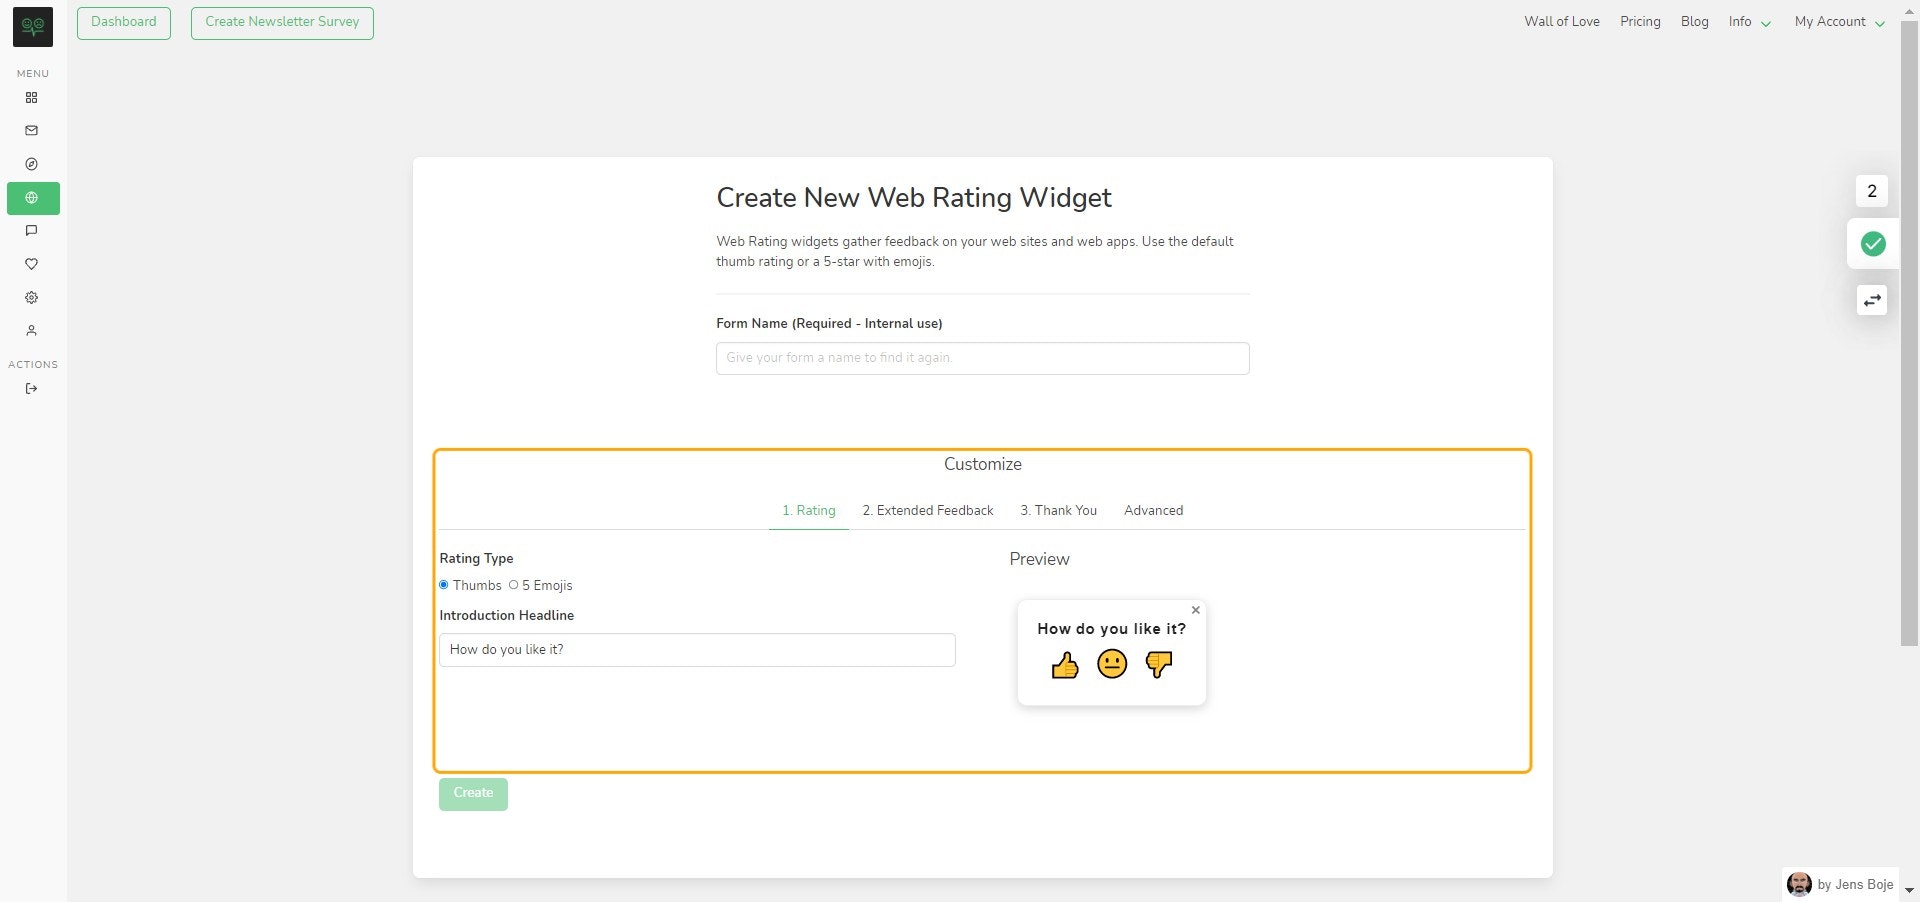 Customize: Rating tab - Choose a rating type